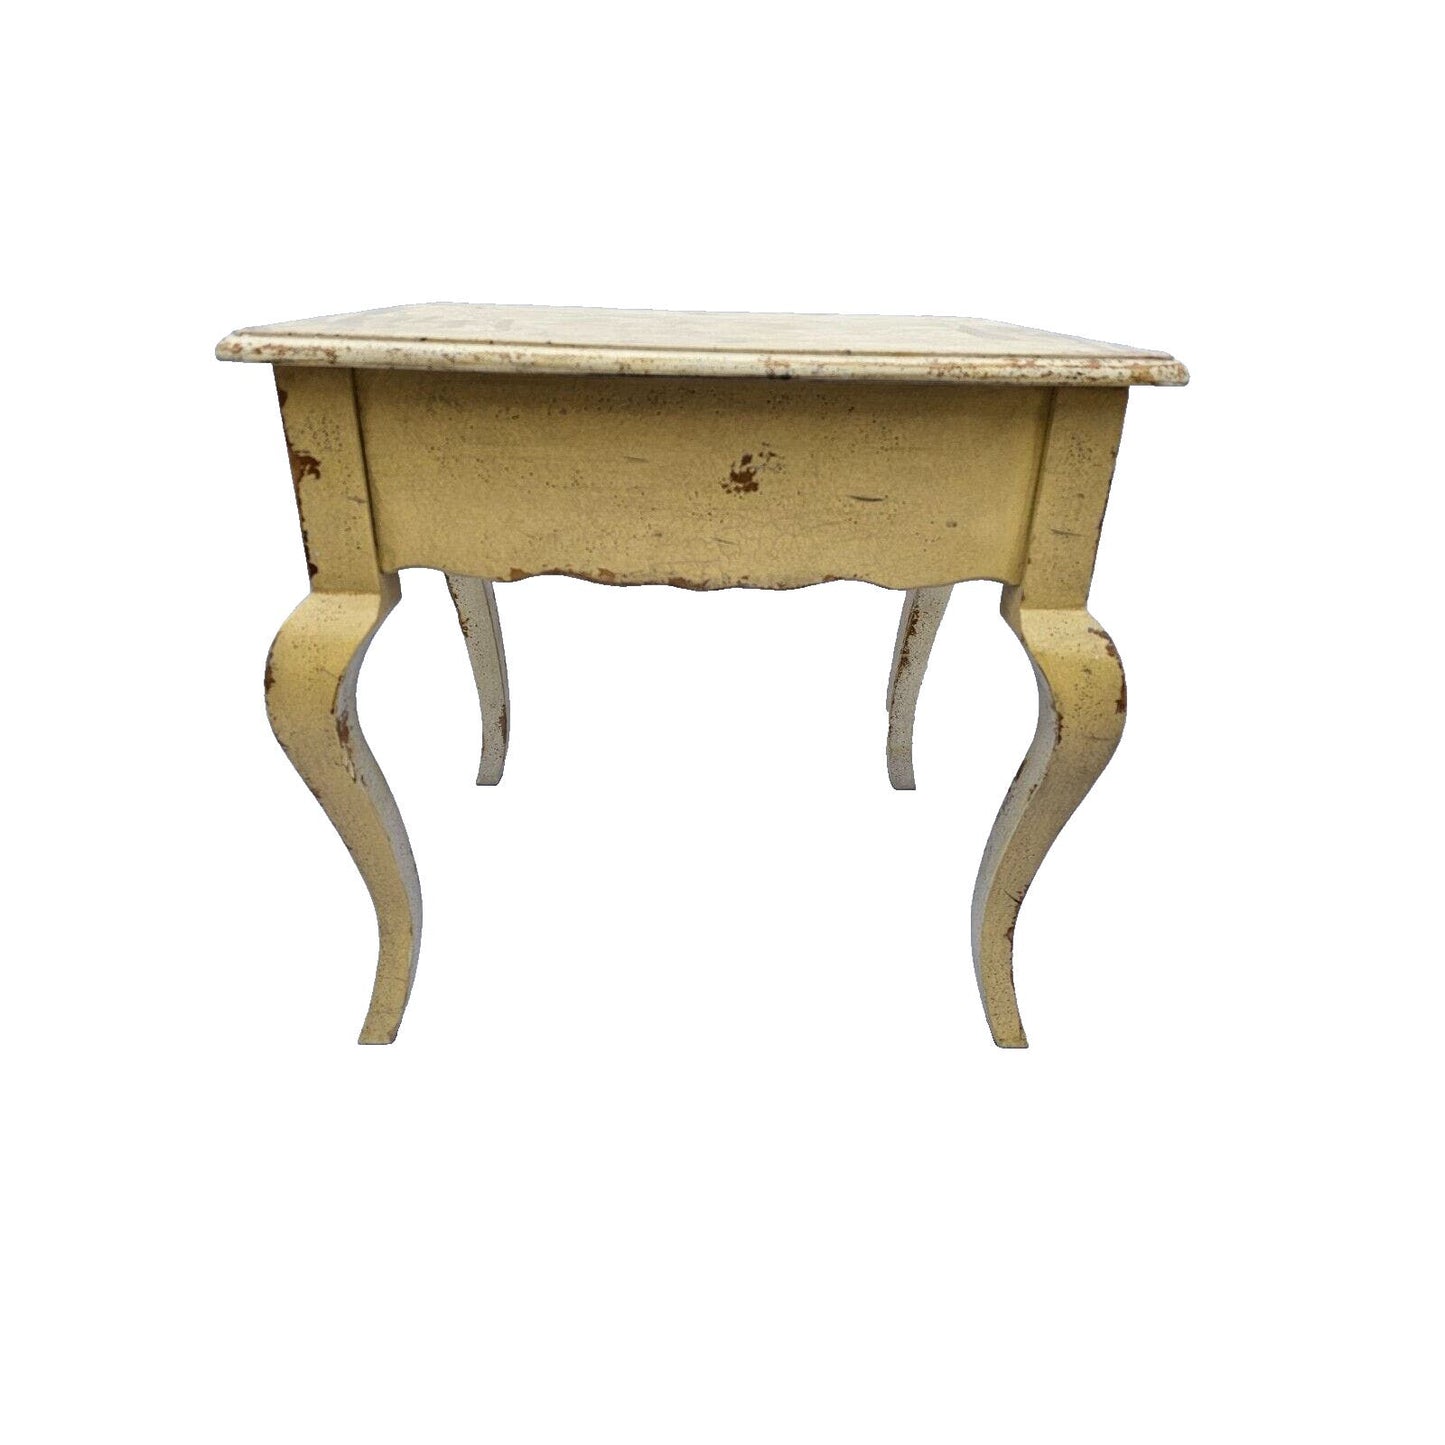 Habersham French Side Table with Drawer Distressed Finish